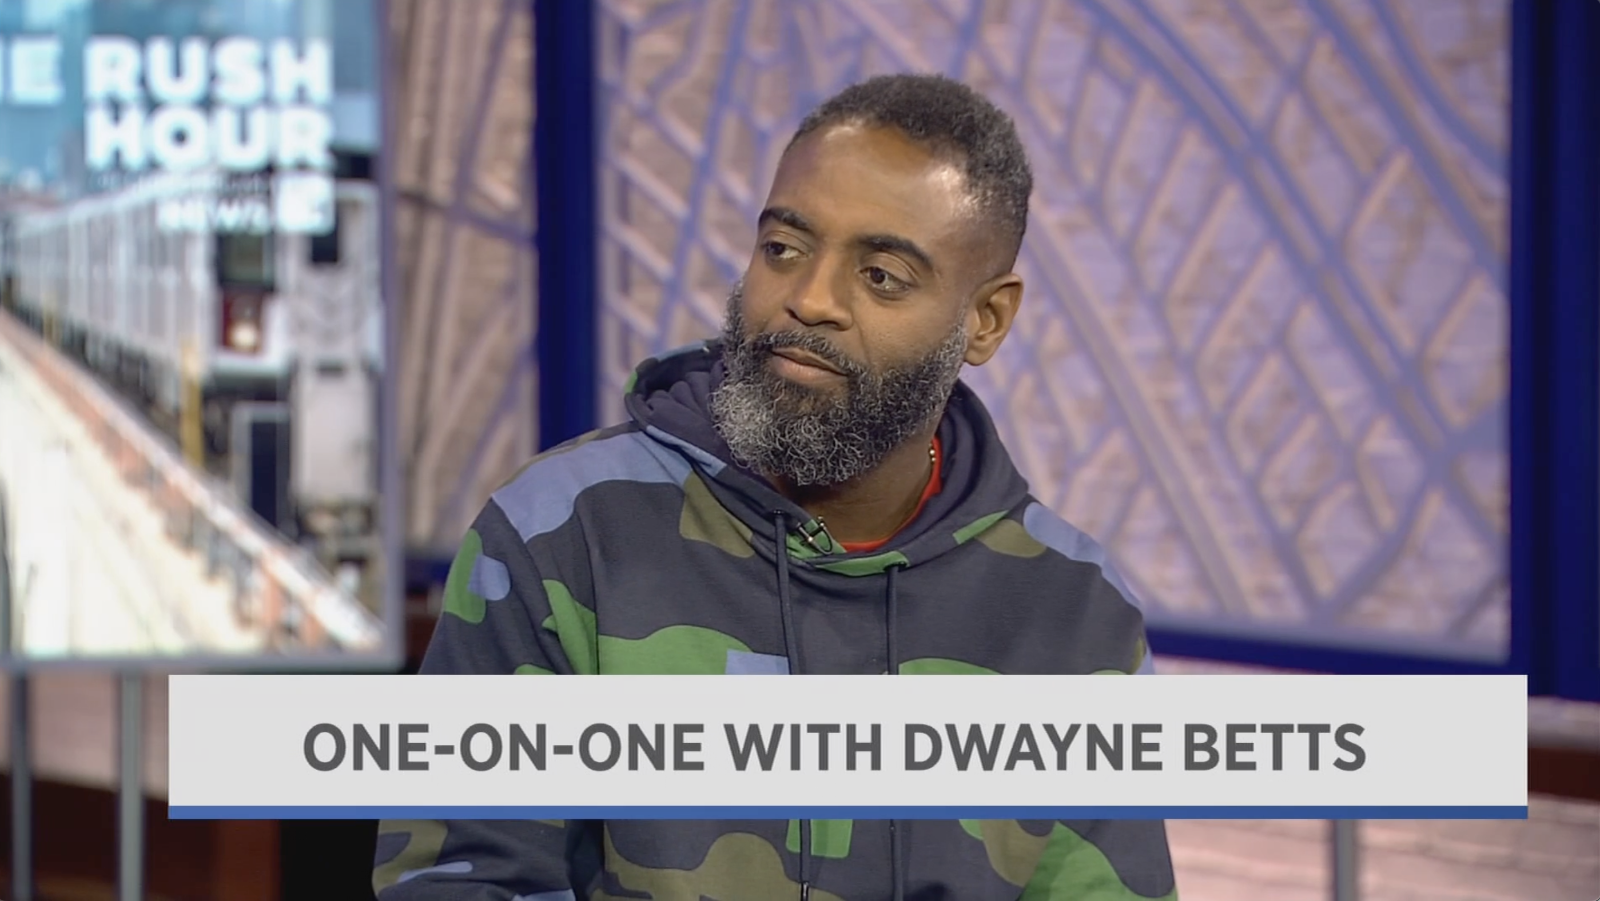 Freedom Reads Founder & CEO Reginald Dwayne Betts being interviewed on NY1.